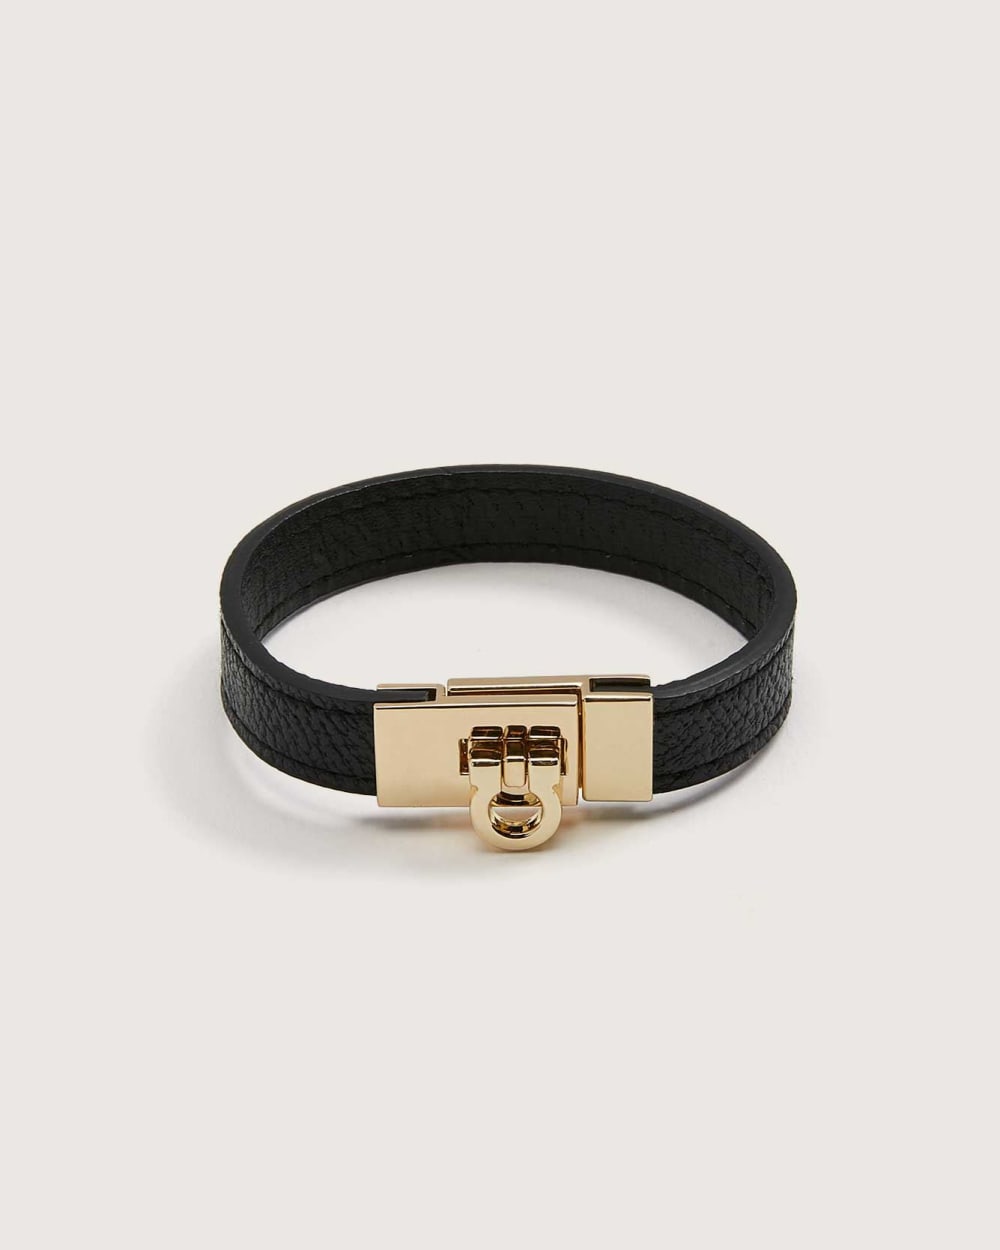 Cuff Bracelet With Gold Metal Closure - In Every Story | Penningtons